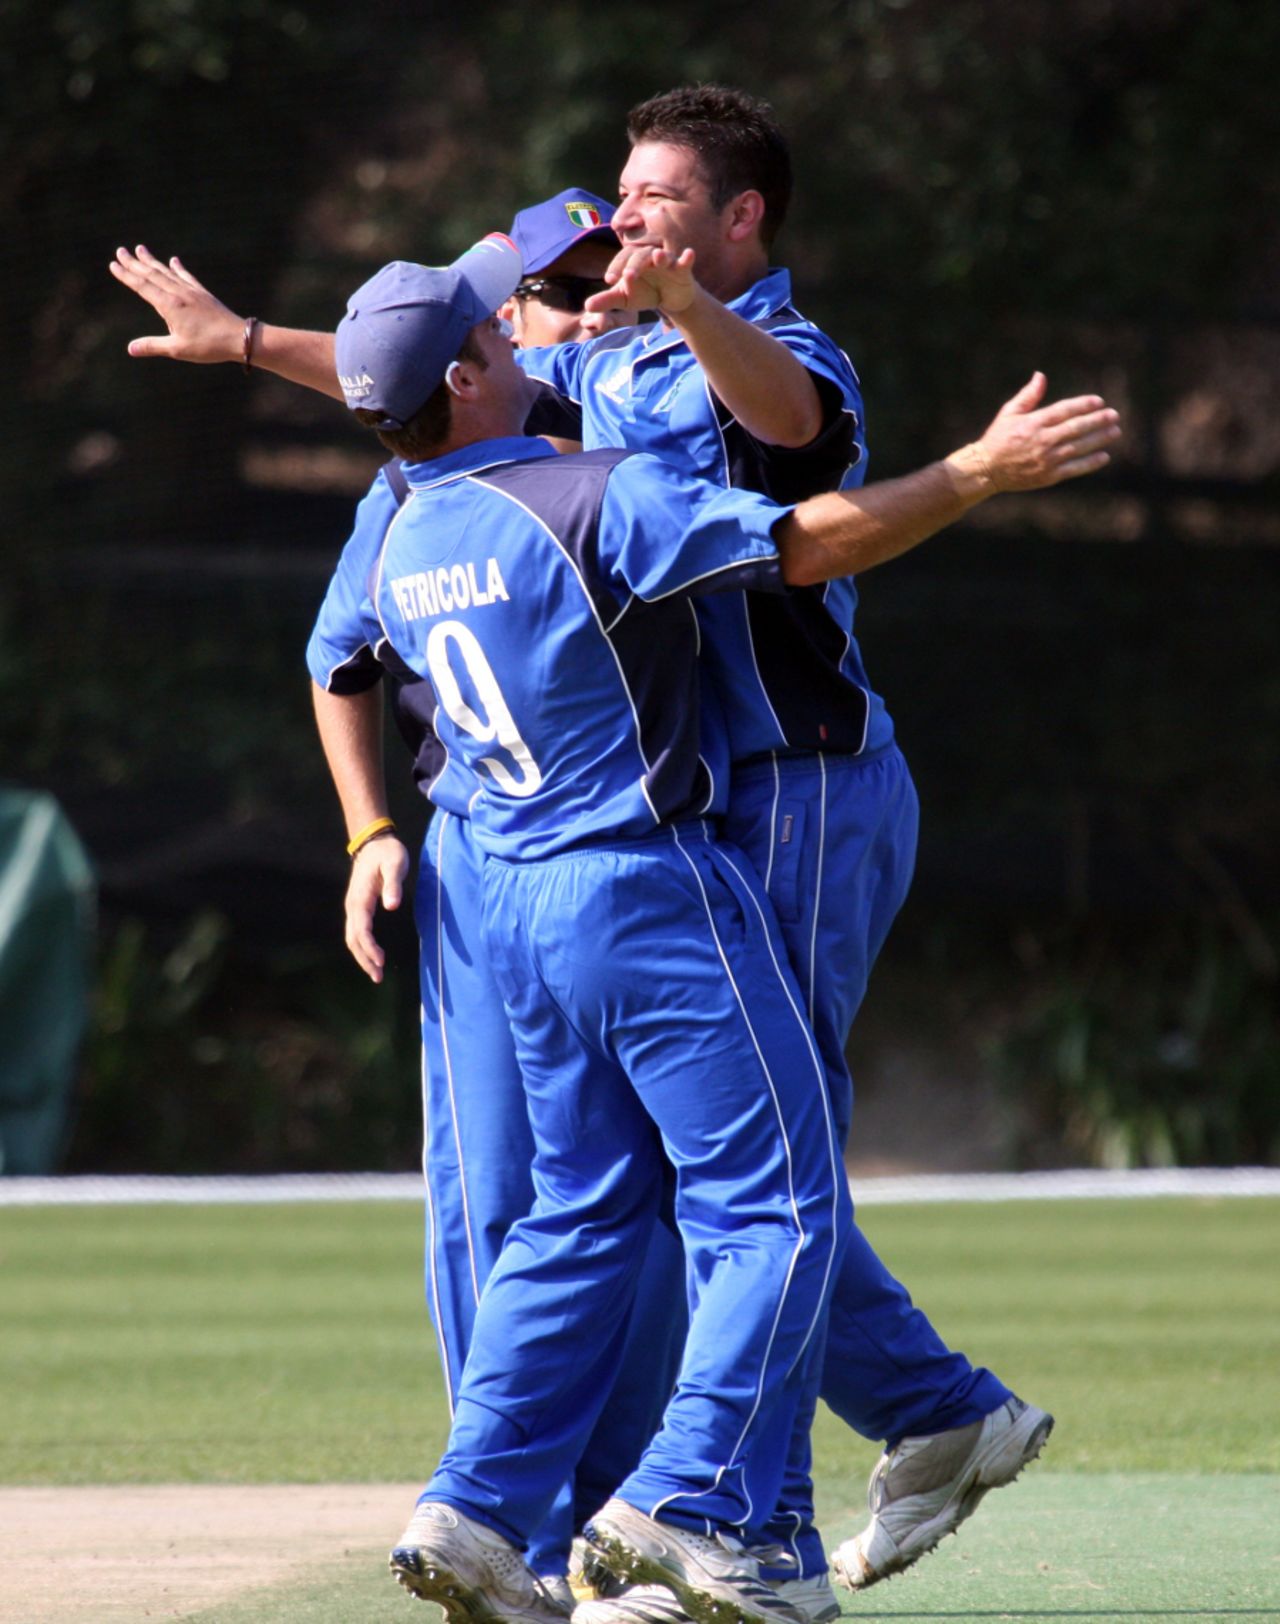 Vincenzo Pennazza is congratuled after taking a wicket, Italy v Papua New Guinea, WCL Division 3, Wong Nai, January 23, 2011